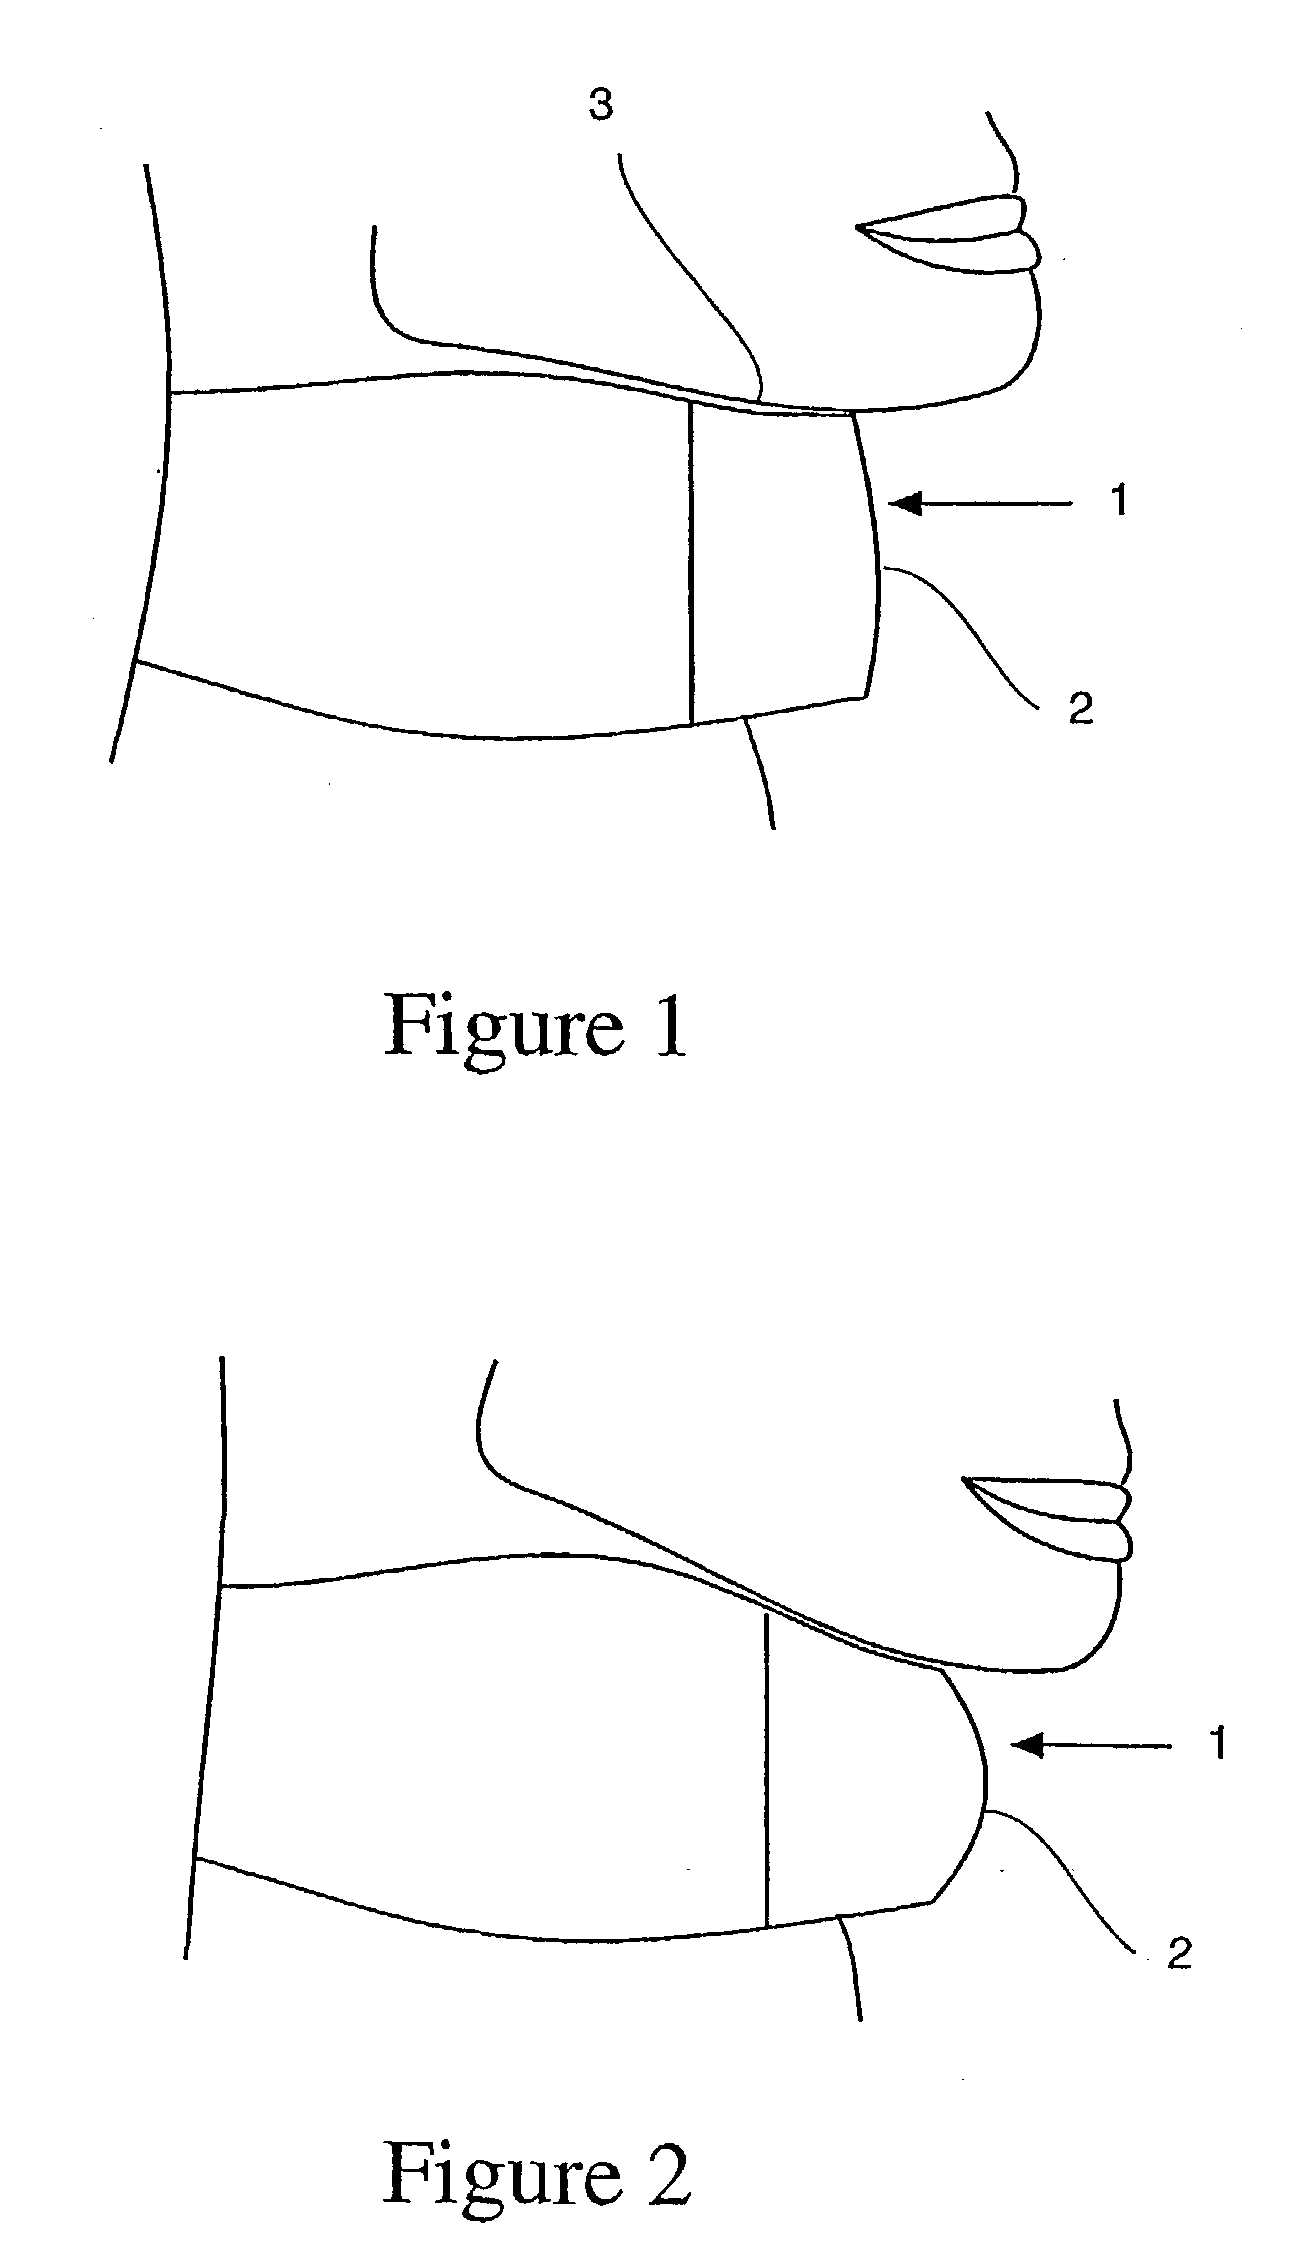 Apparatus and method for exercising and monitoring the performance of the upper flexor muscles of the neck